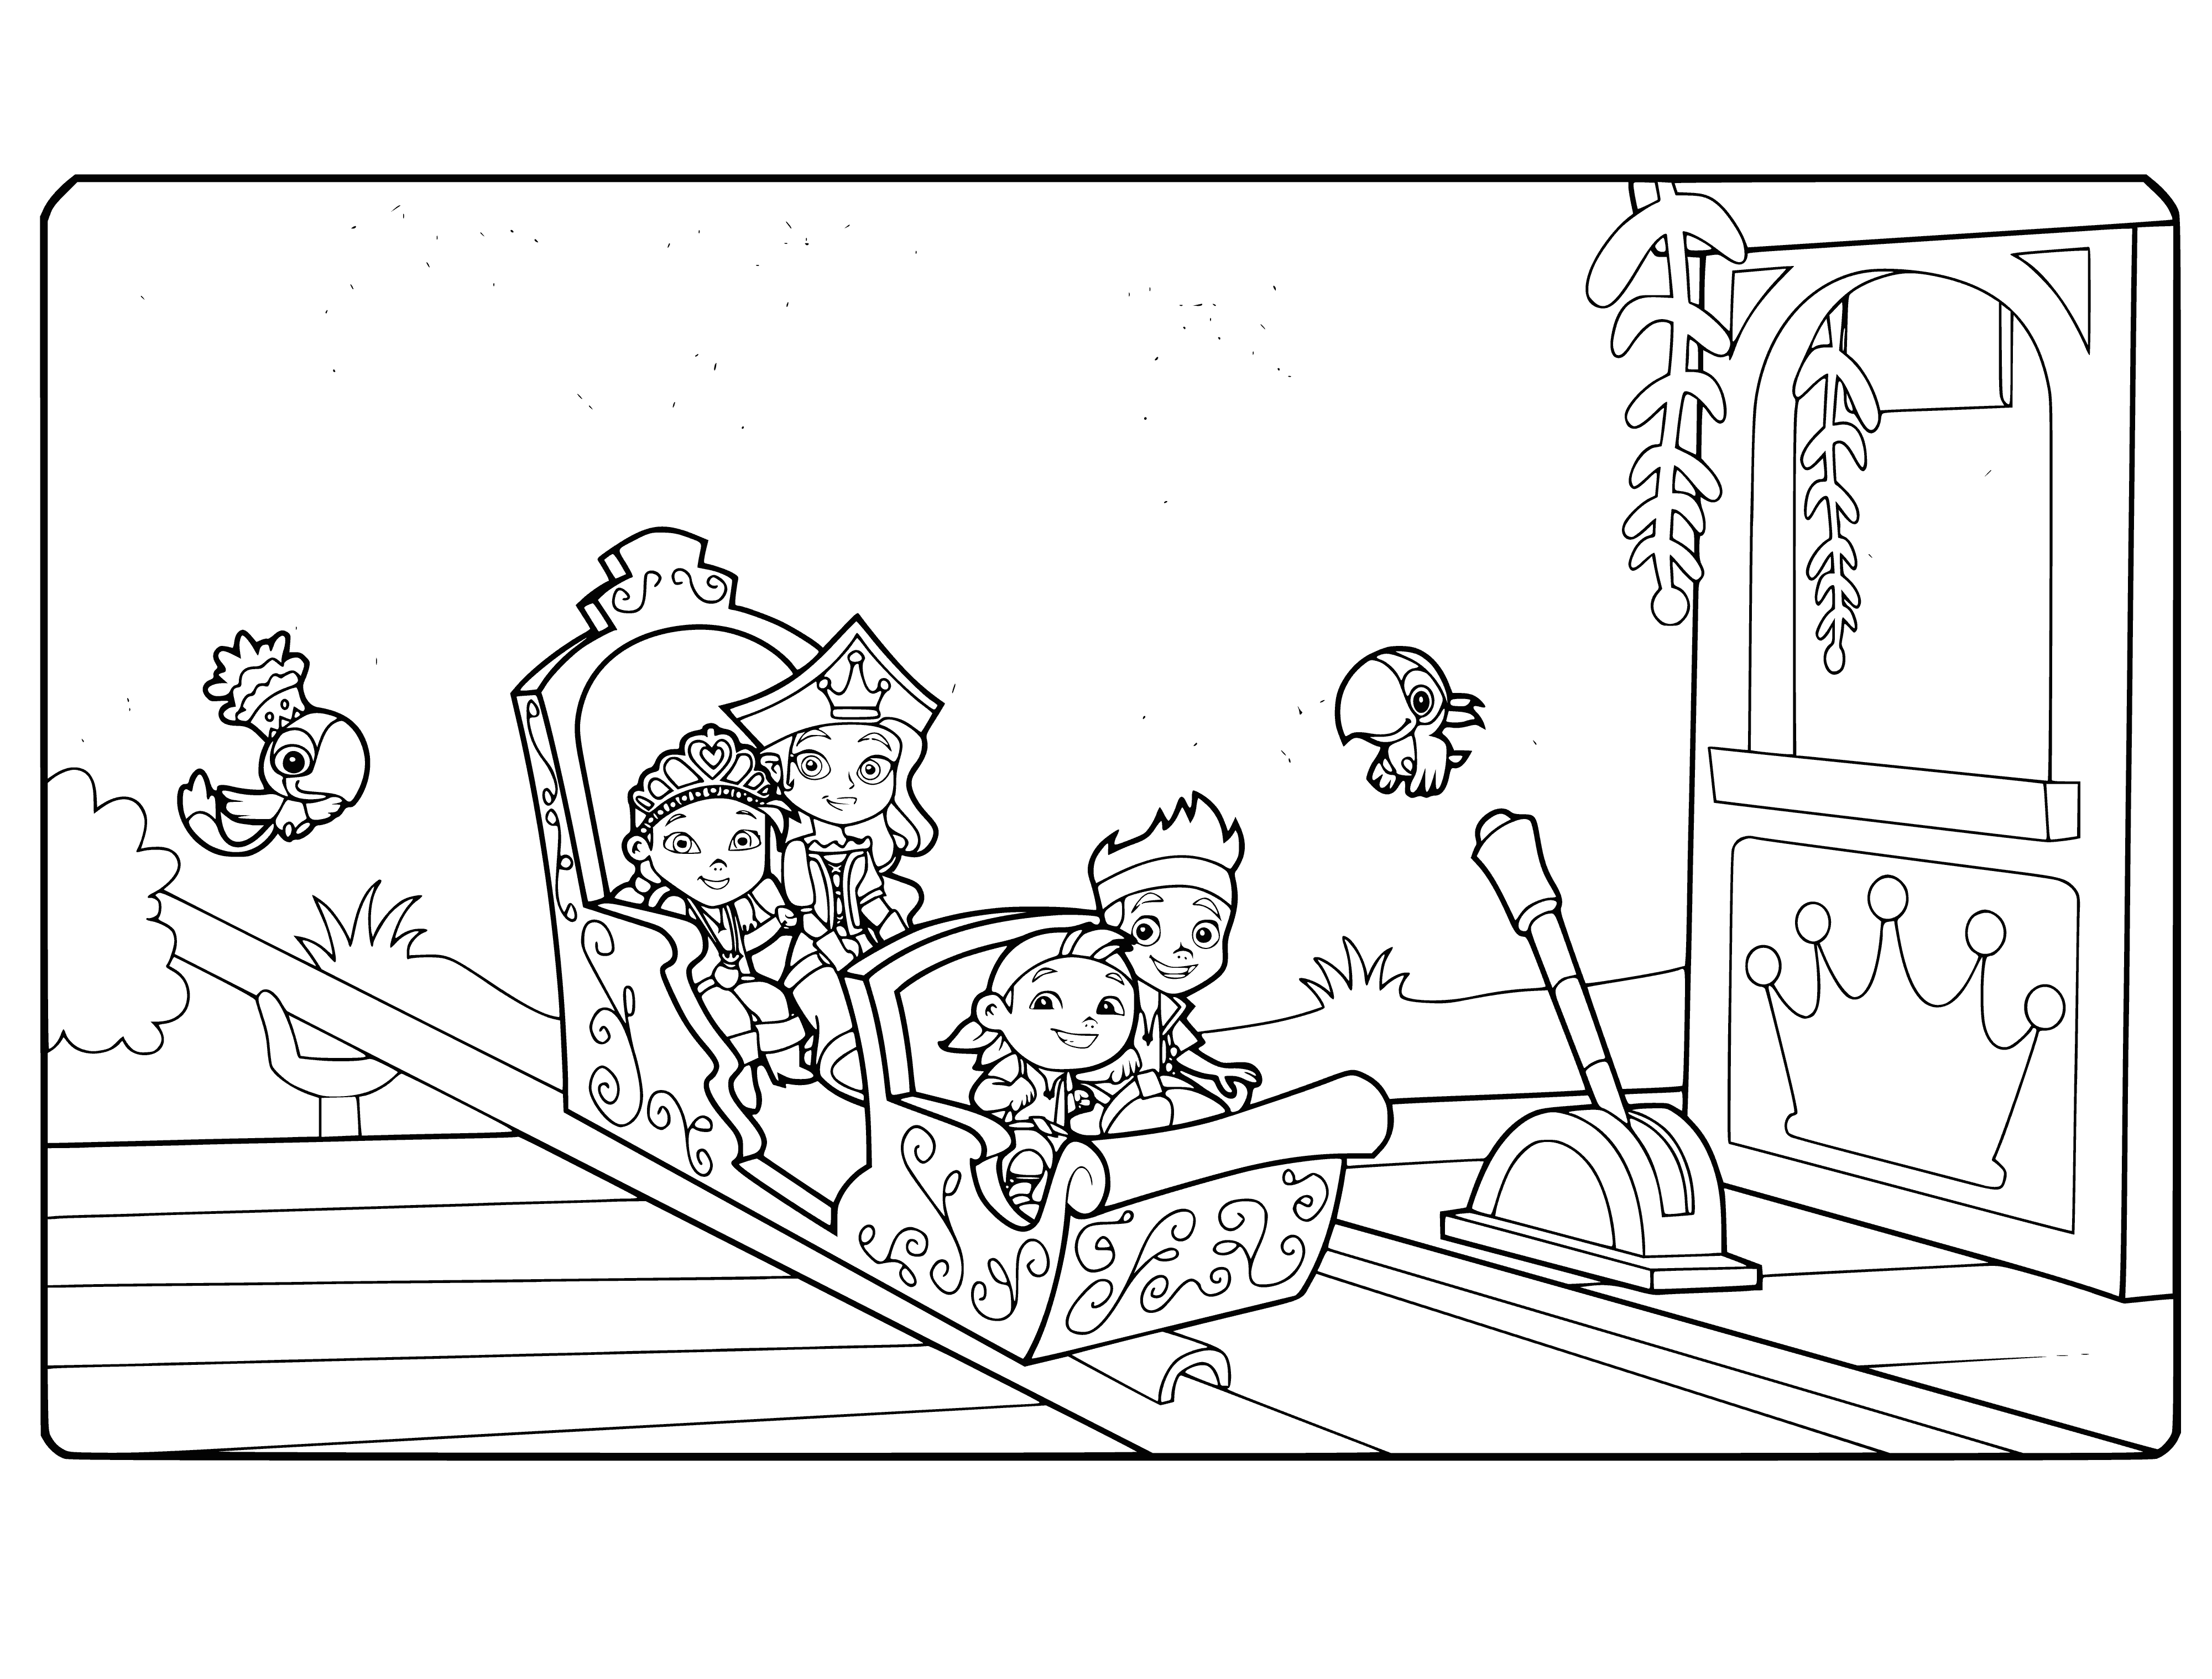 coloring page: Two reindeer and two waving characters, Jake and the Pirate Princess, stand beside a large empty sleigh in the center. #ChristmasInJuly